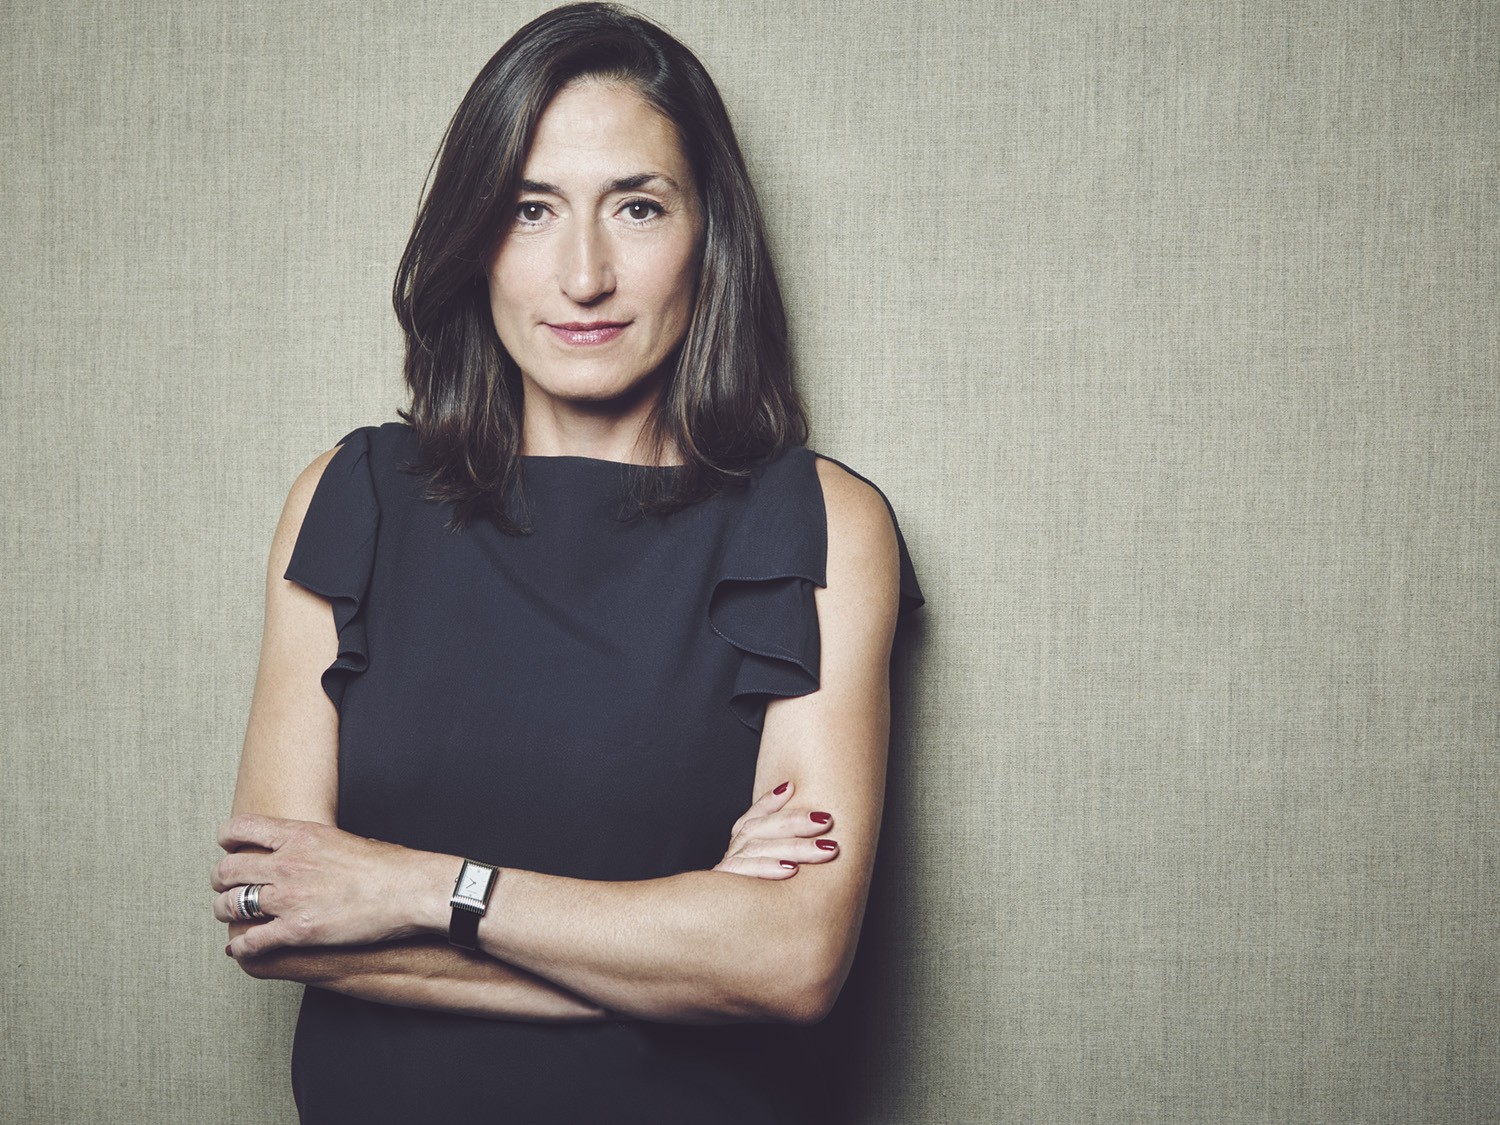 Hélène Poulit-Duquesne, CEO of Boucheron, says the brand definitely needs a brick-and-mortar presence, but online customers are equally important. The two complement each other.